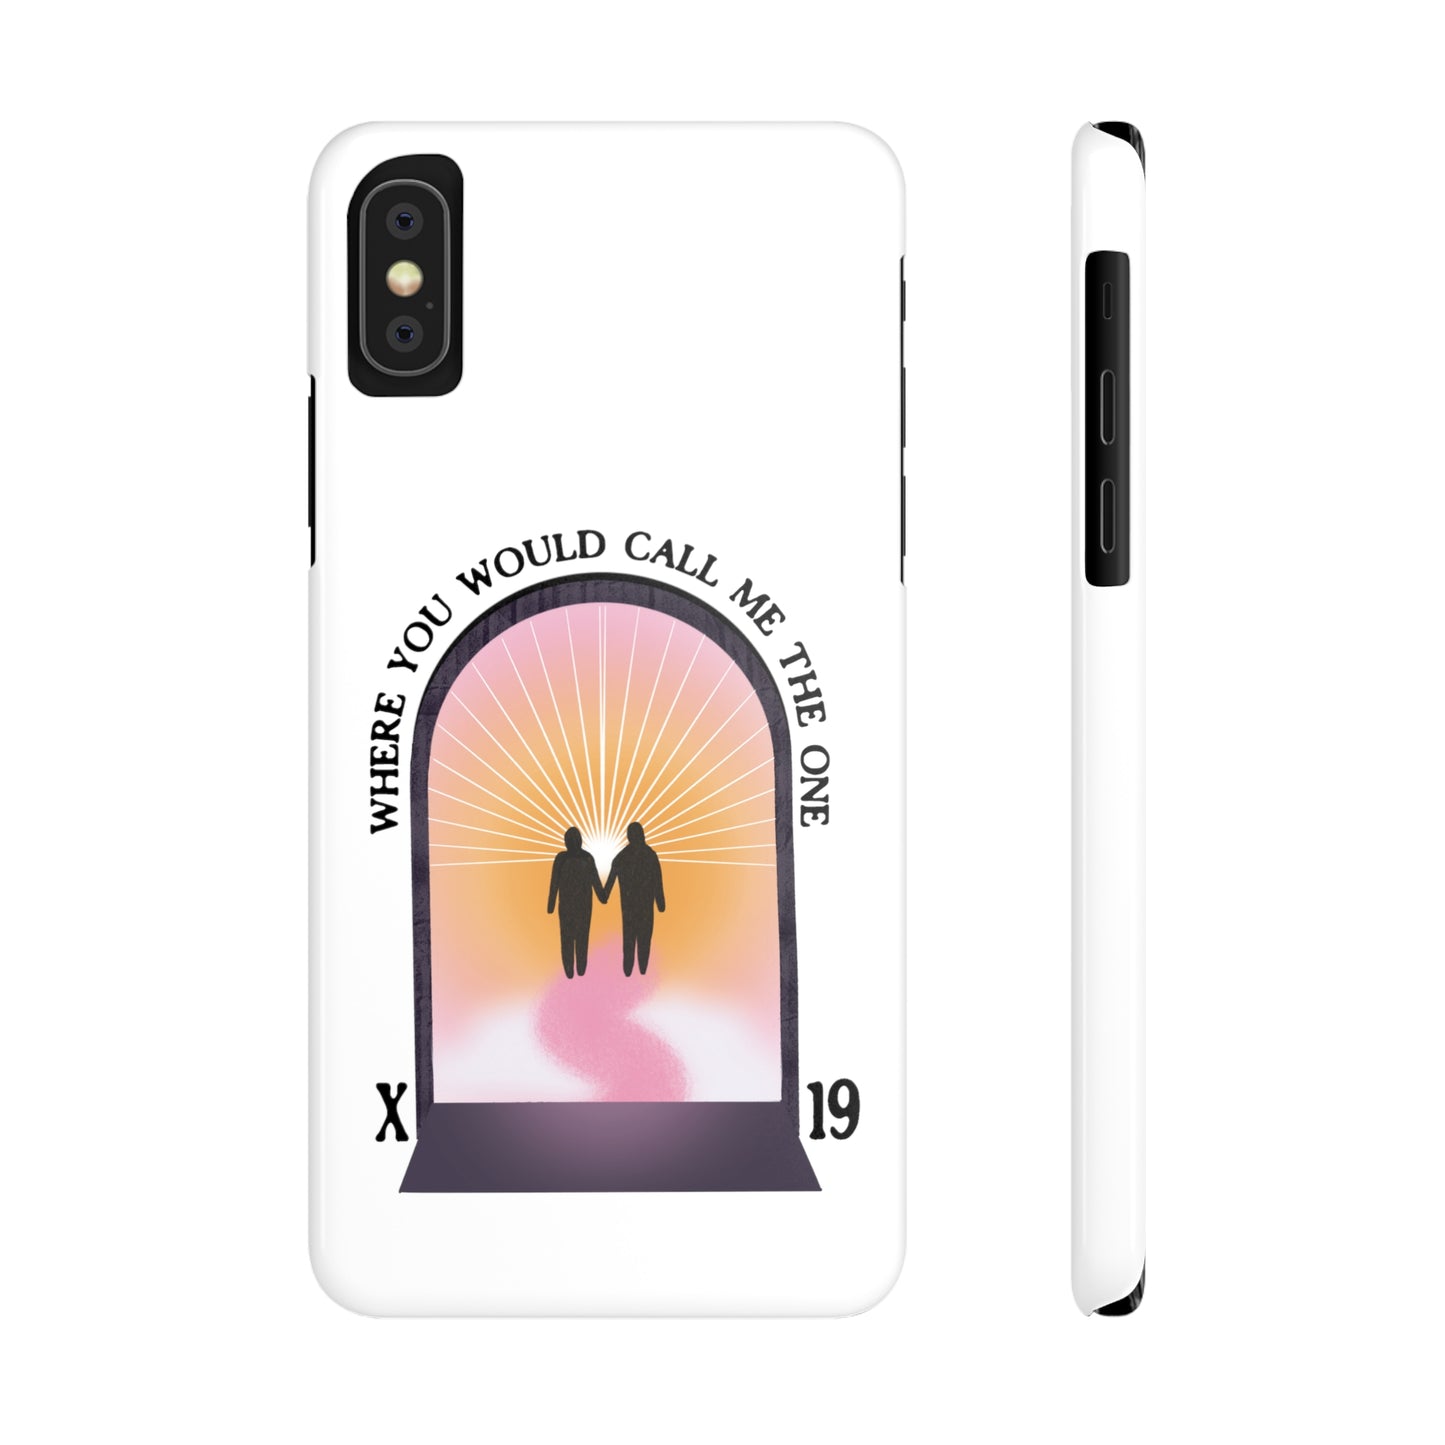 Where You Would Call Me The One - Slim Phone Case